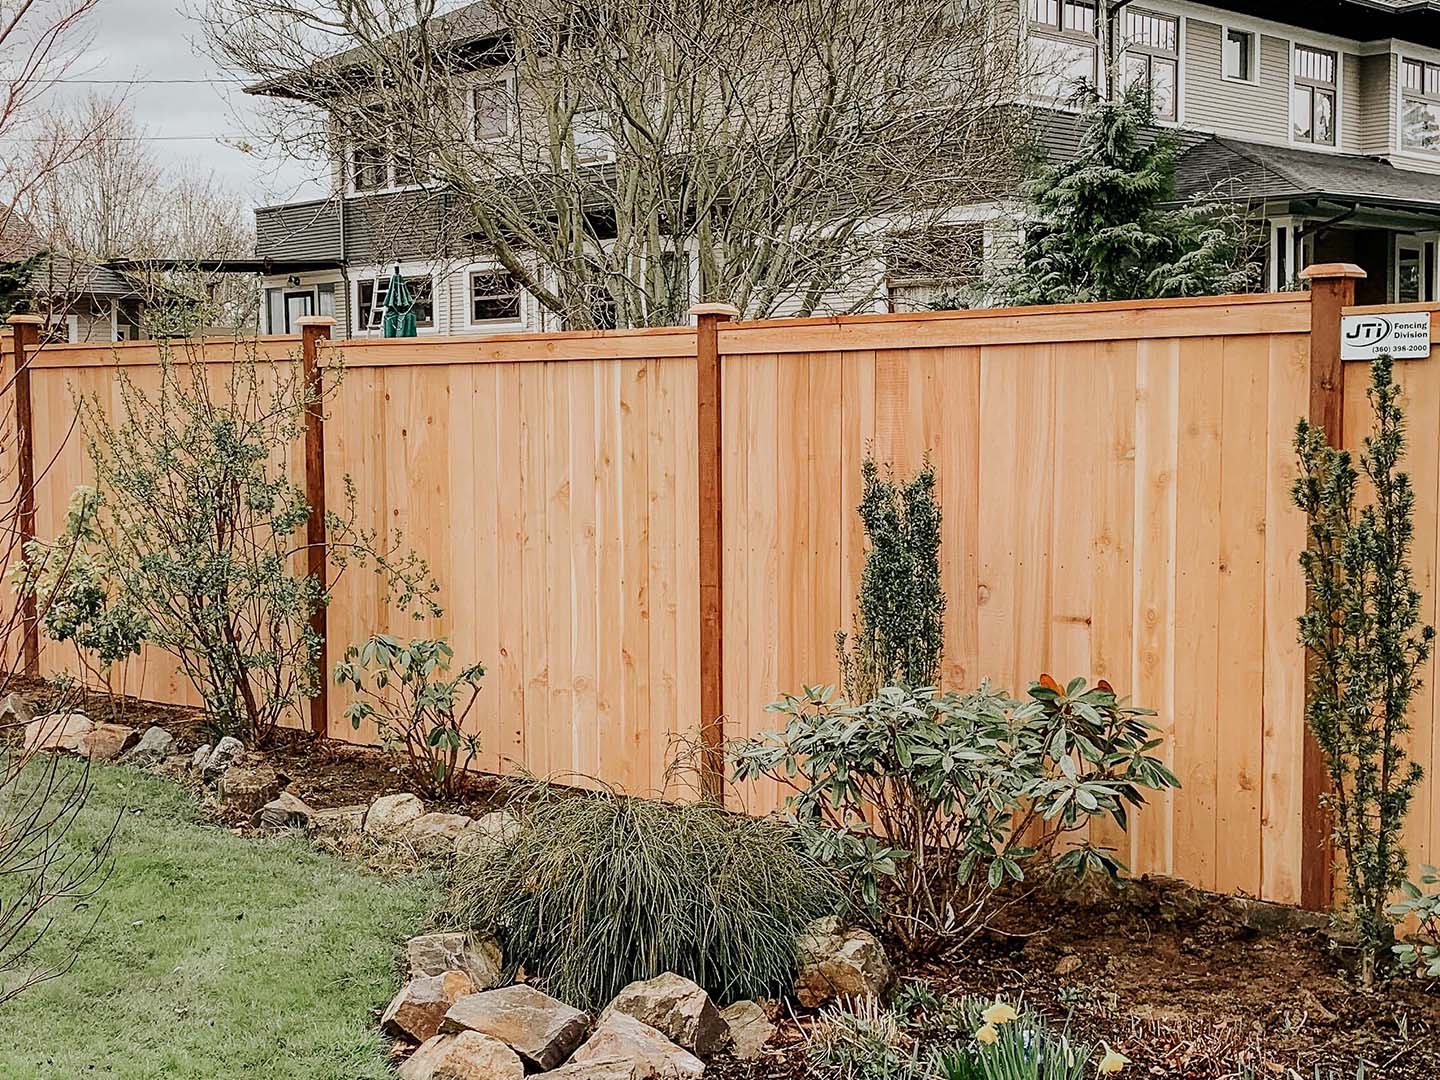 Photo of a cedar wood privacy fence in Northern Washington